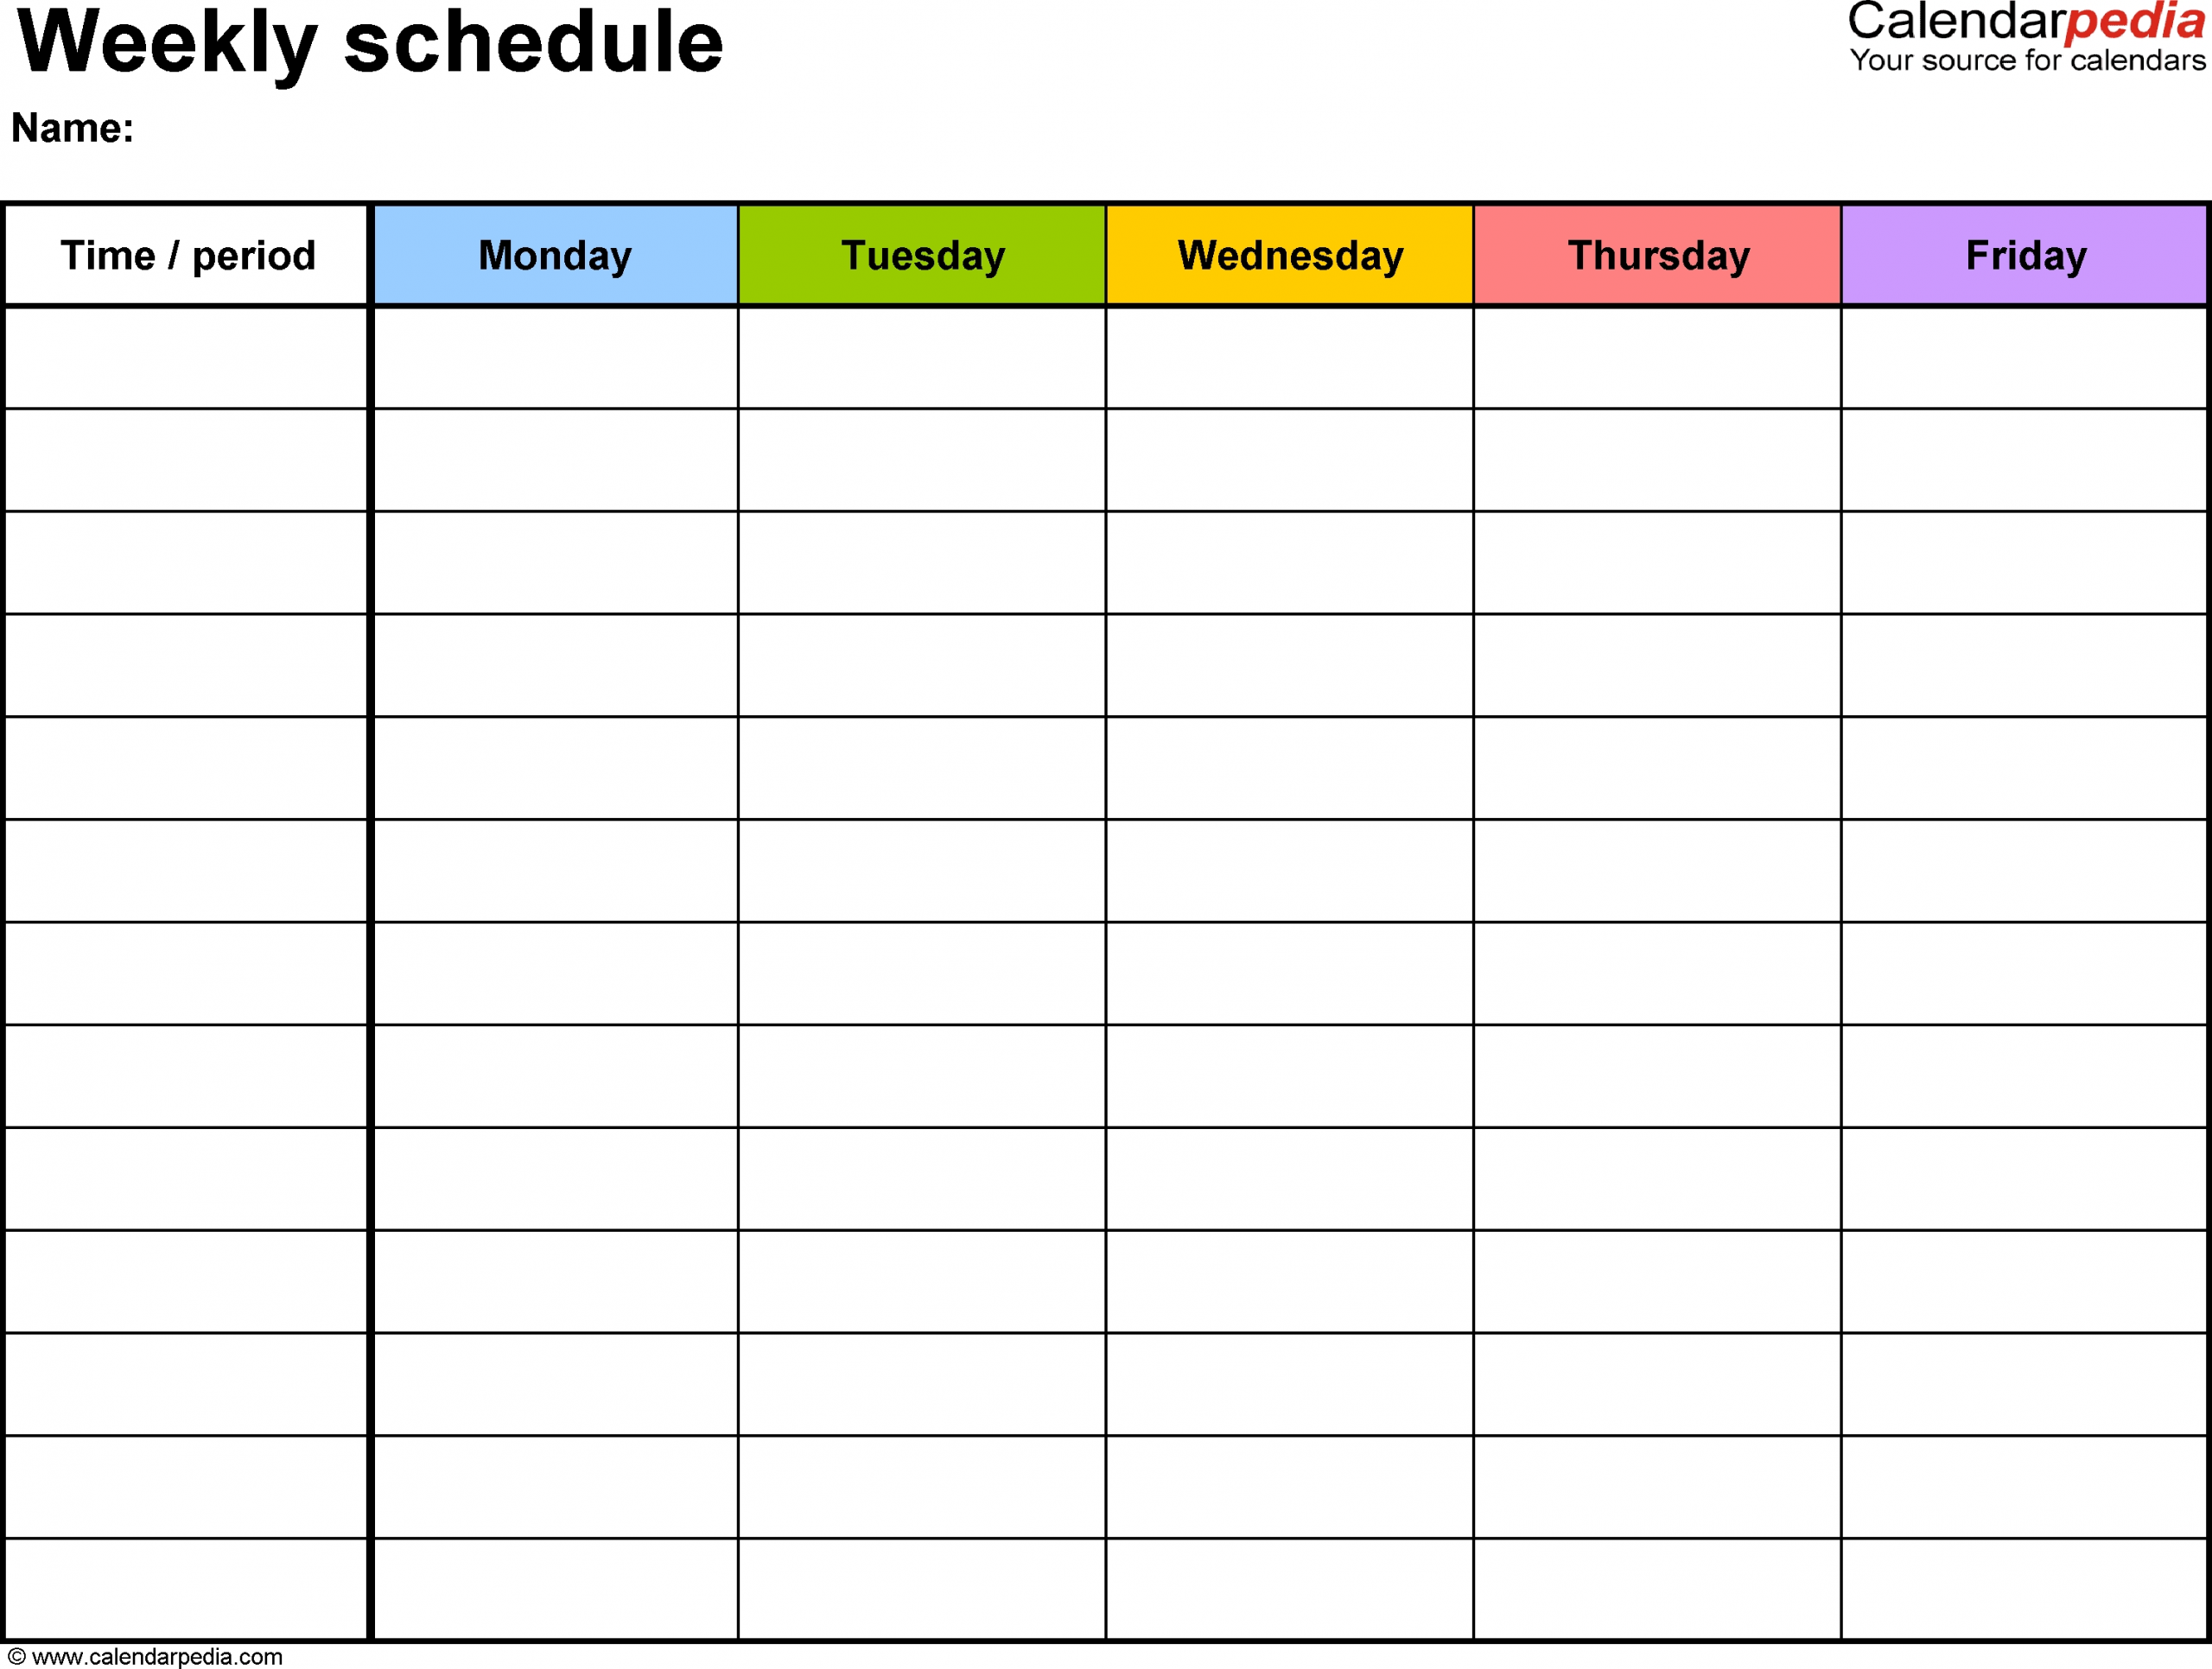 Free Weekly Schedule Templates For Pdf - 18 Templates inside Weekly Planner Template For Students